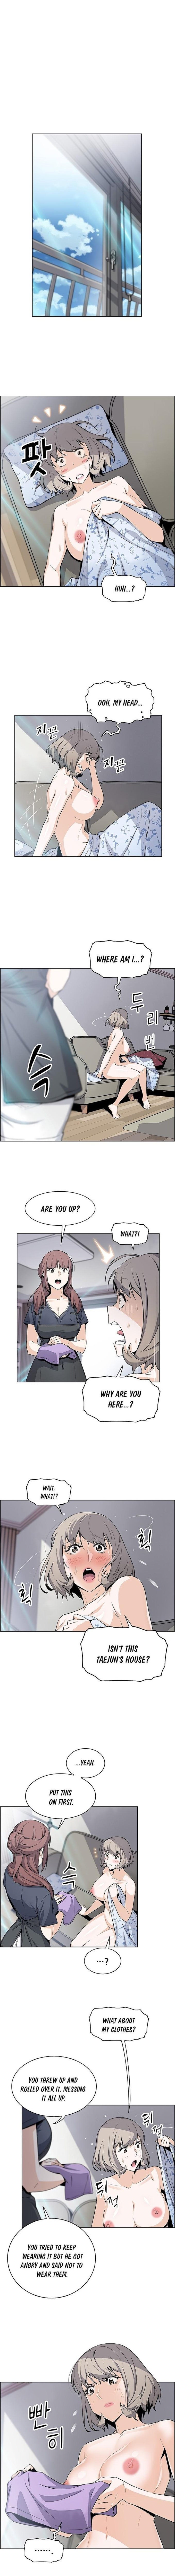 Housekeeper [Neck Pillow, Paper] Ch.49/49 [English] [Manhwa PDF] Completed 317